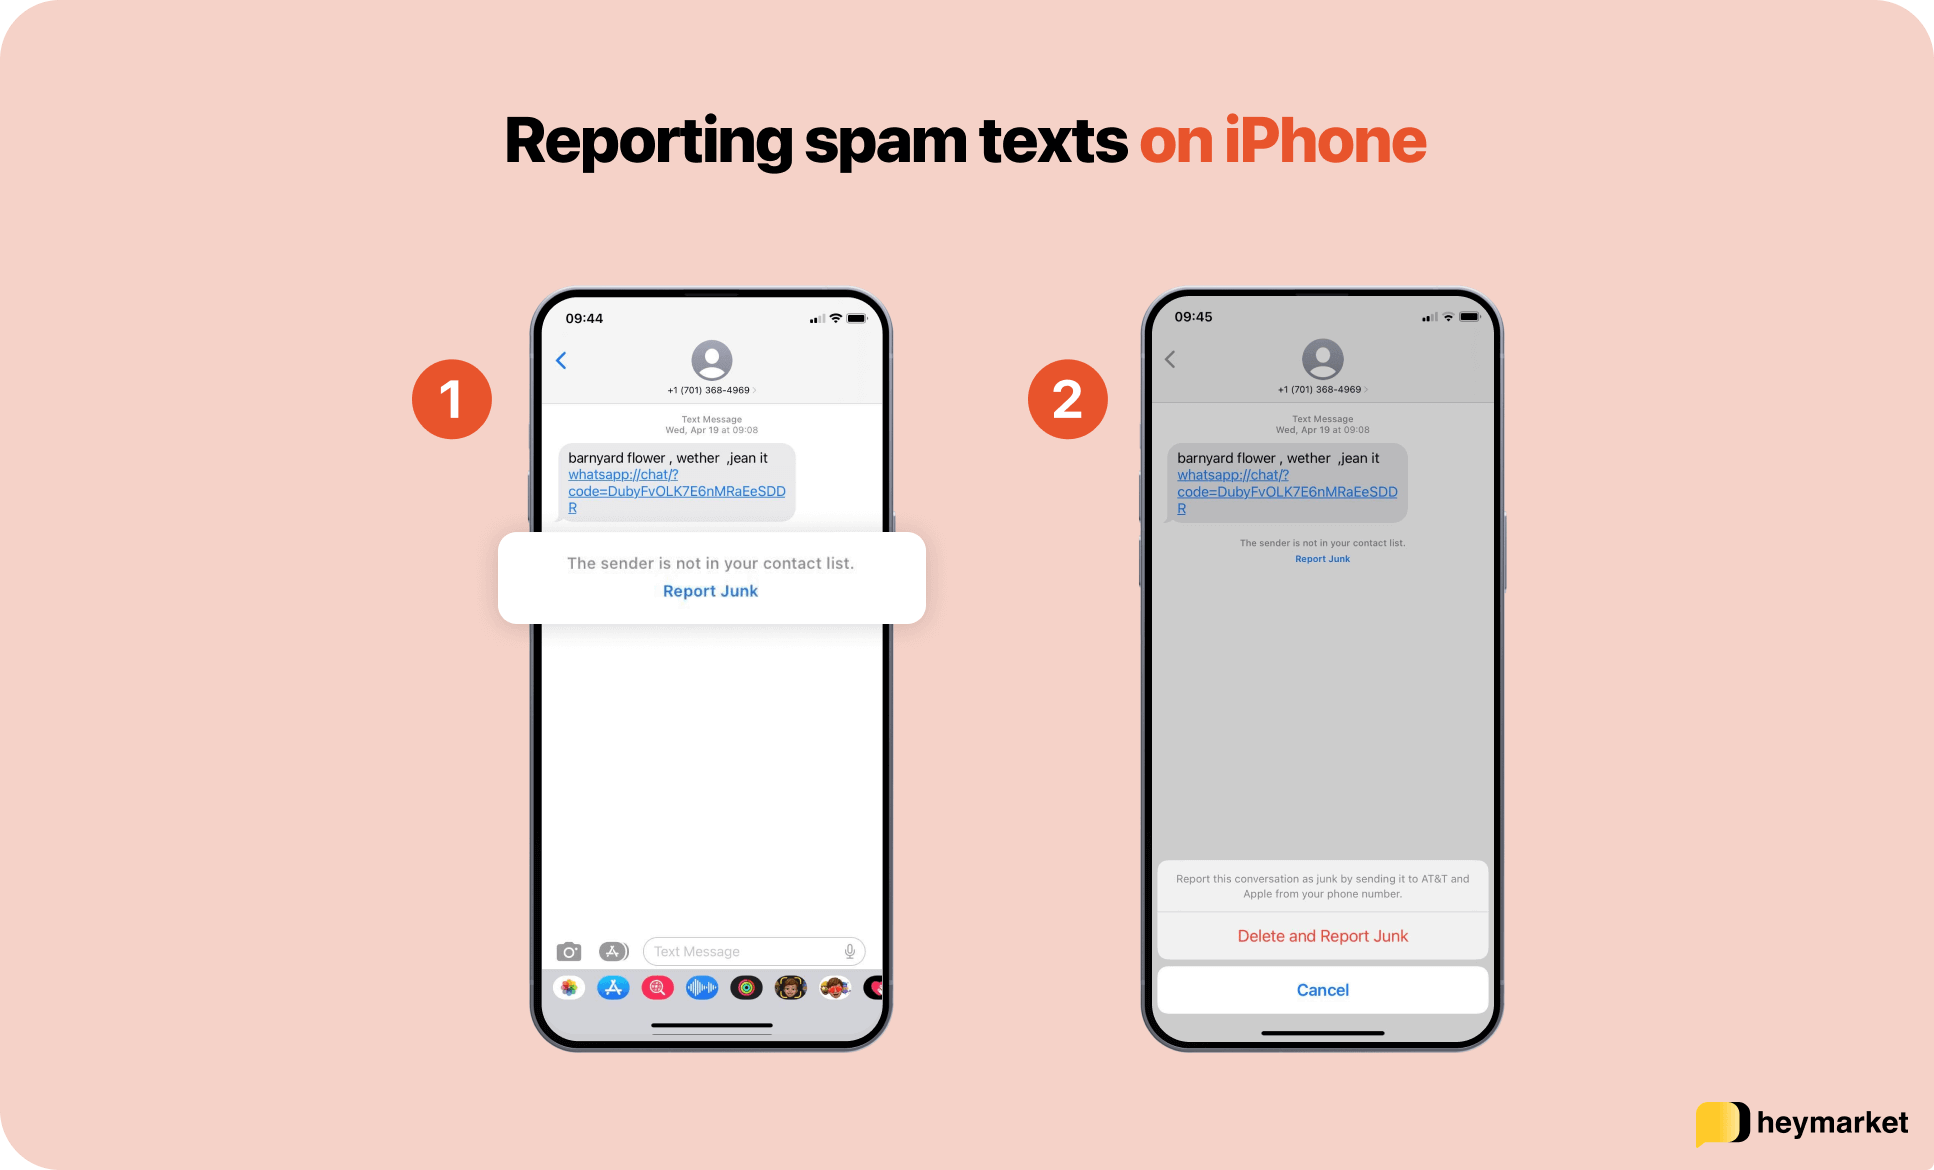 Steps for reporting spam texts on iPhone